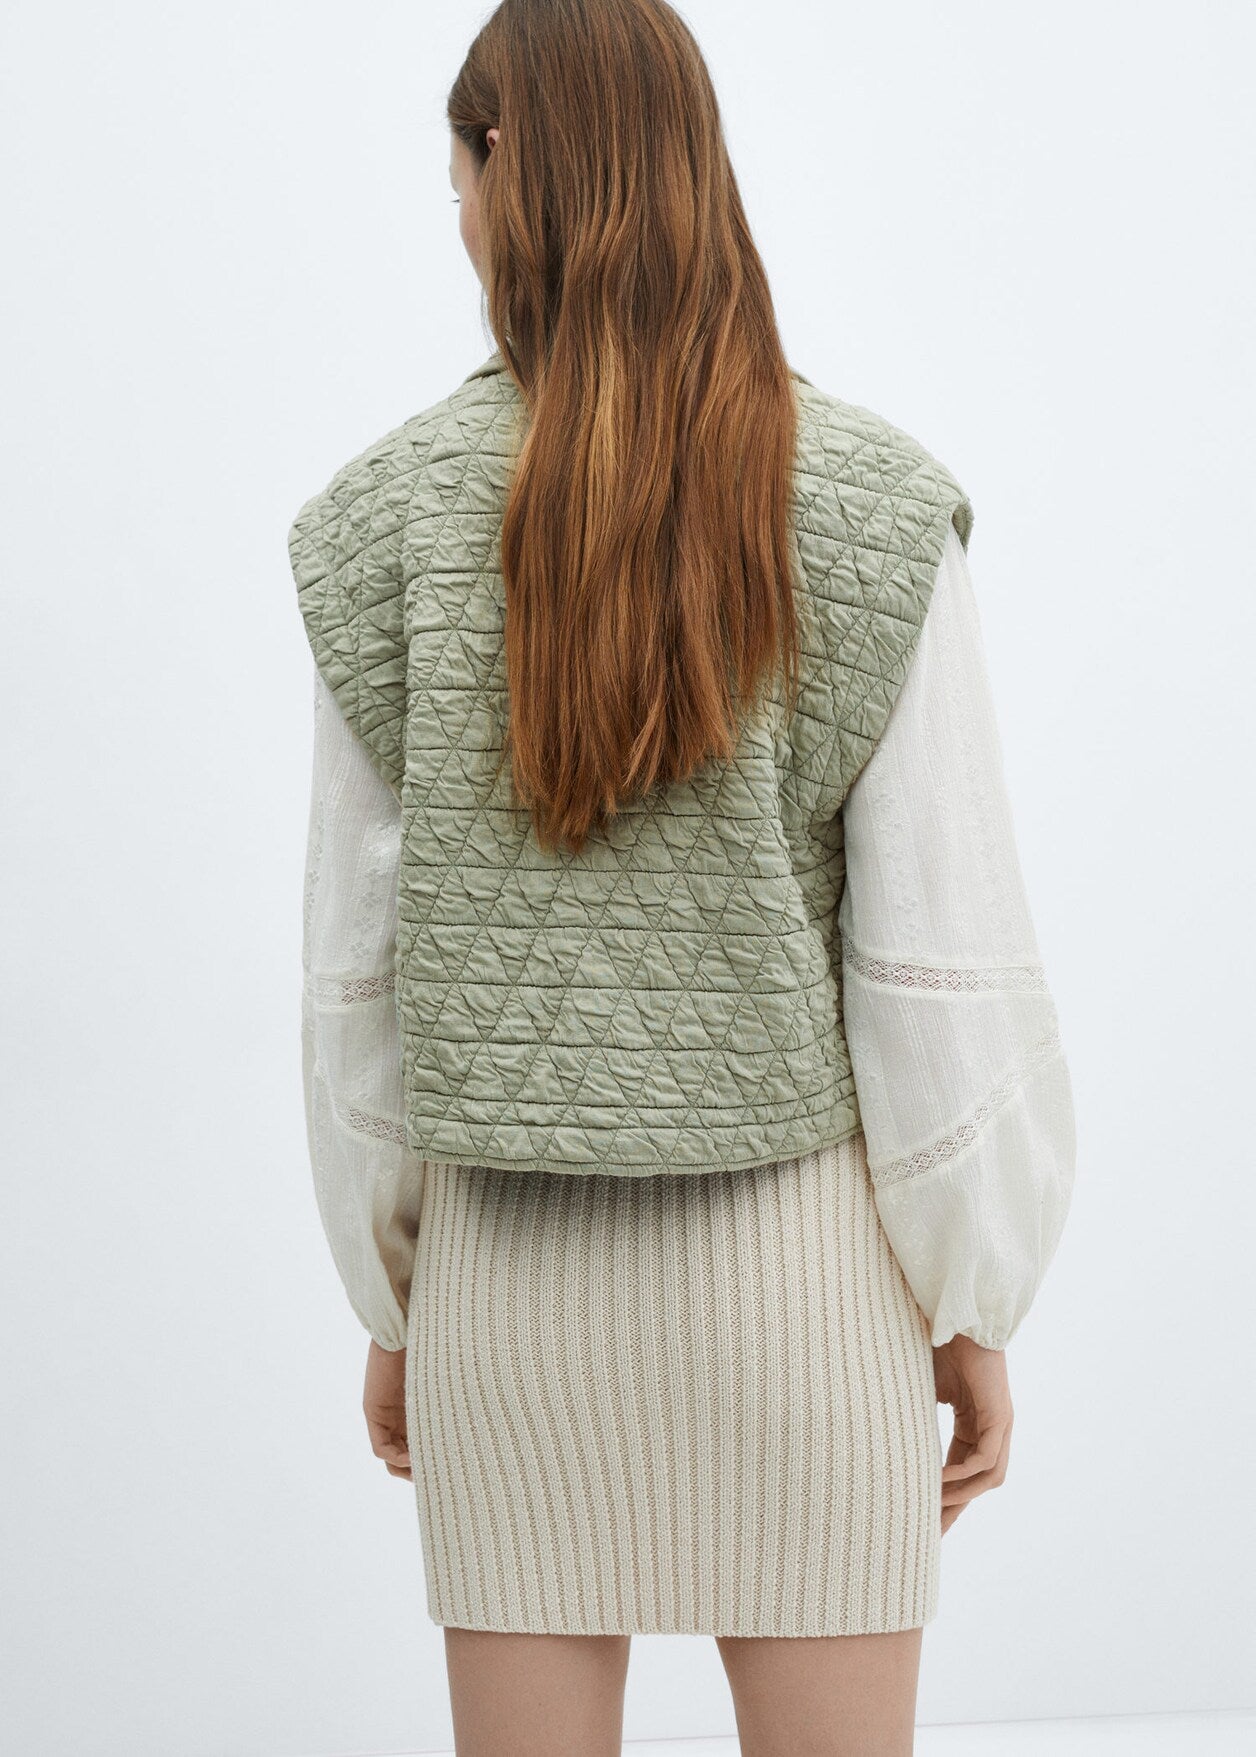 Quilted gilet with buttons